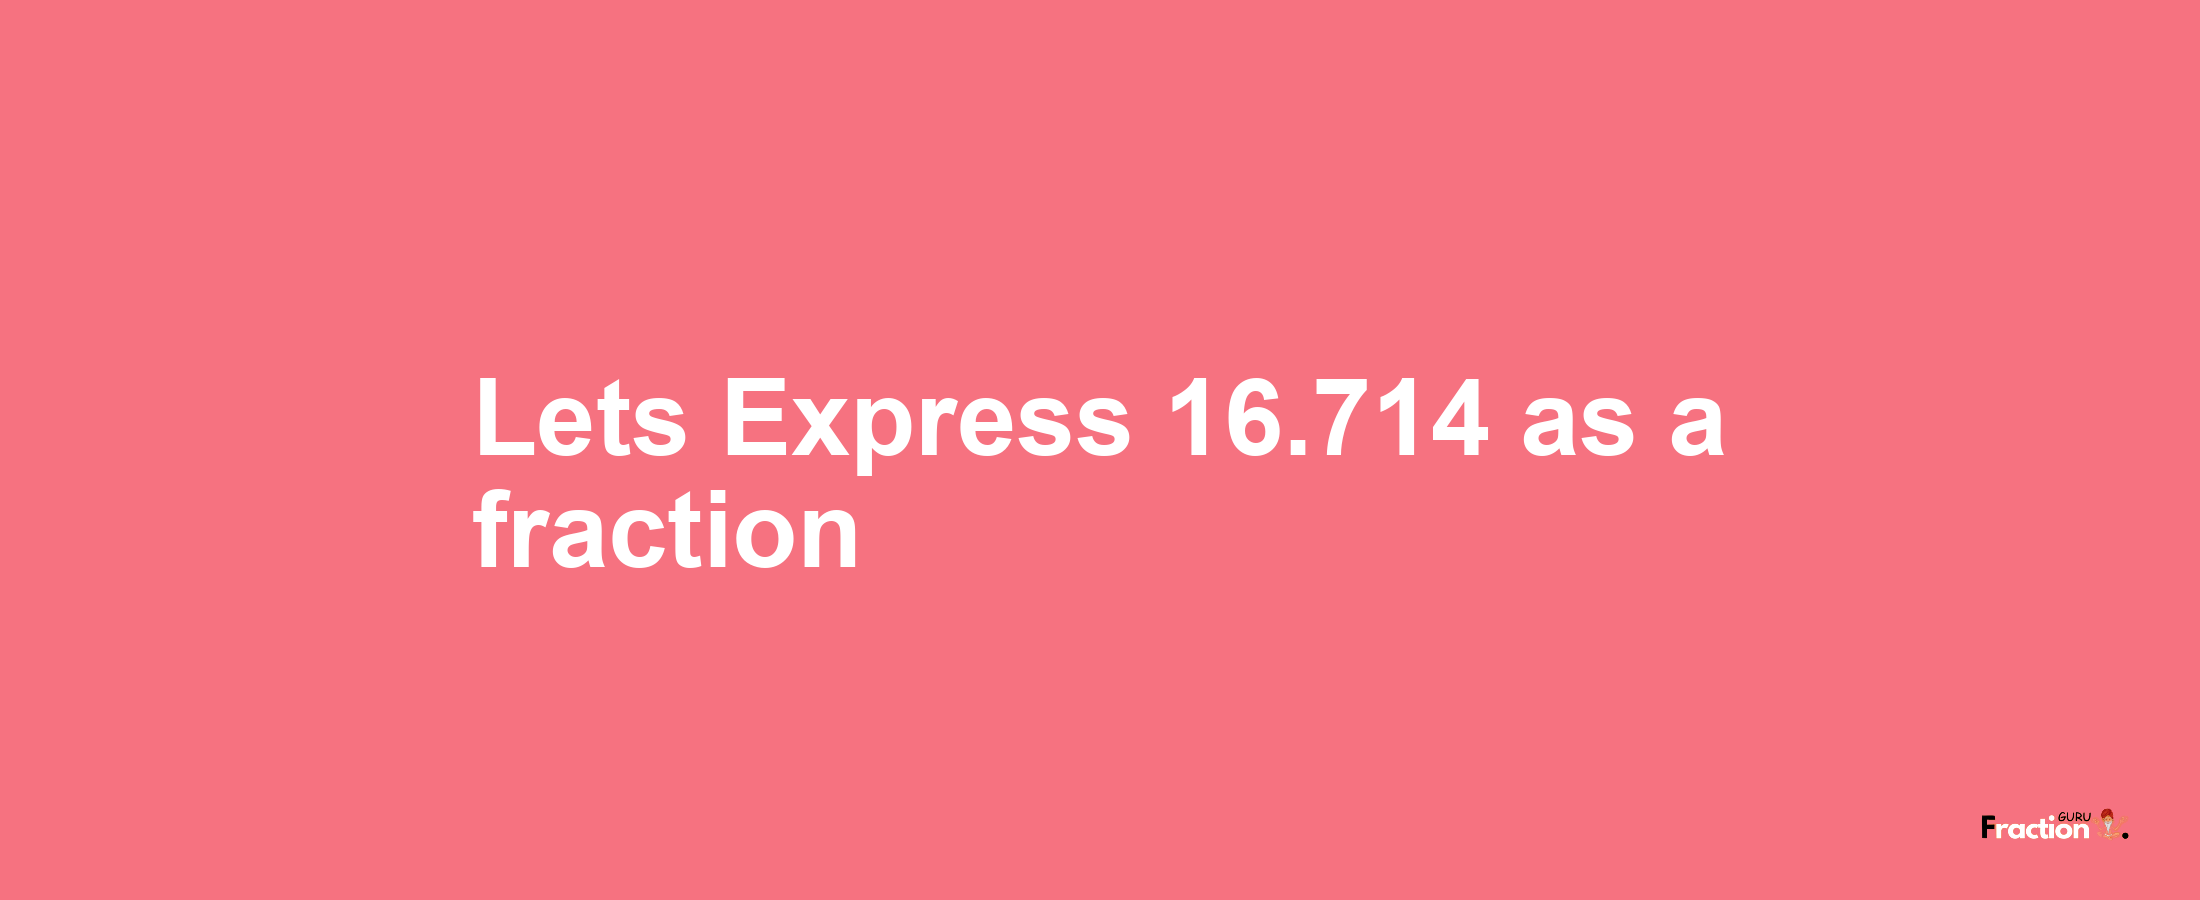 Lets Express 16.714 as afraction